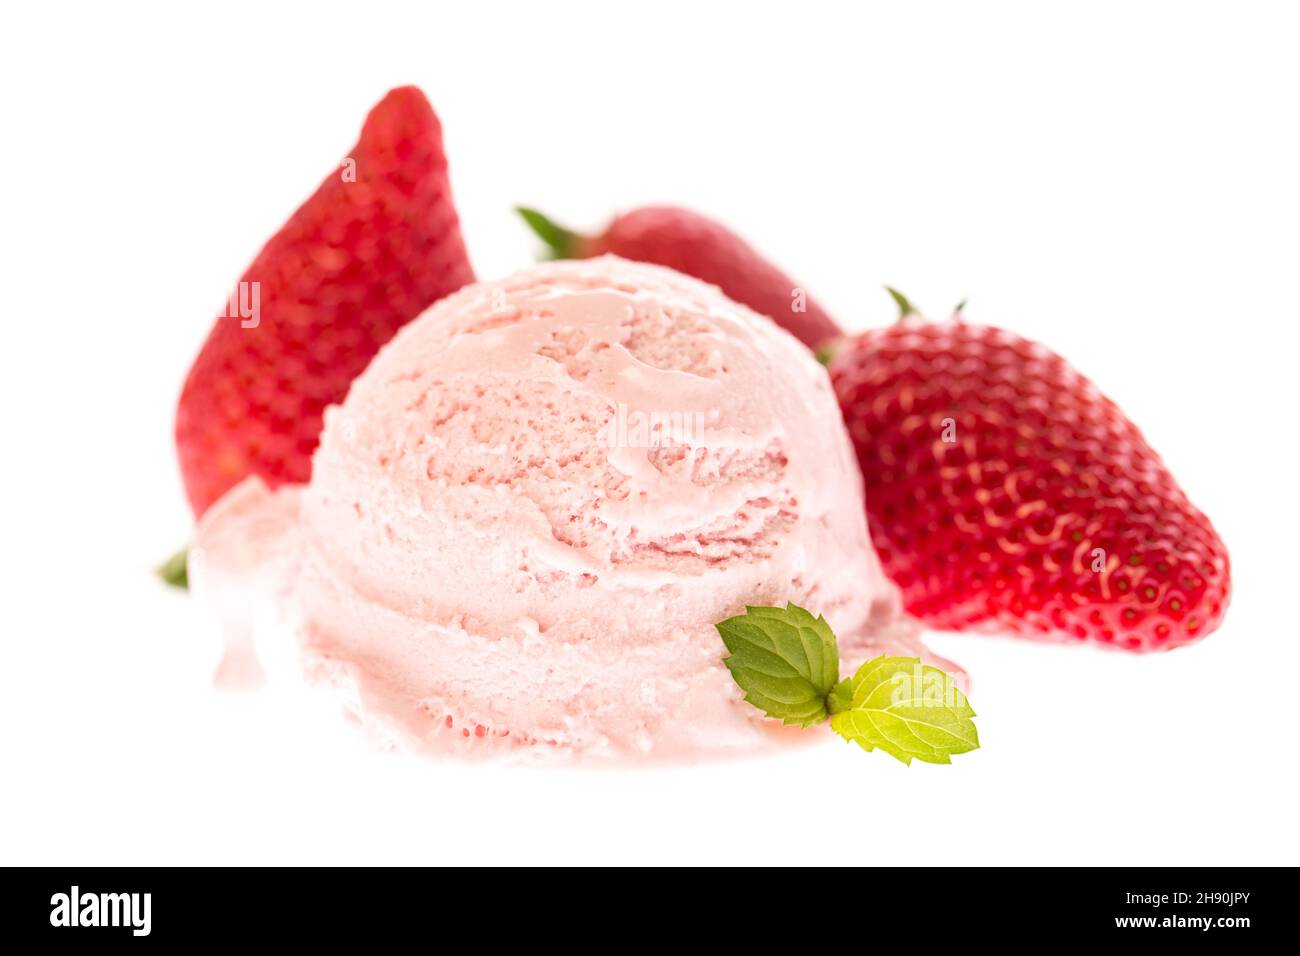 A scoop of strawberry ice cream with mint and strawberries Stock Photo